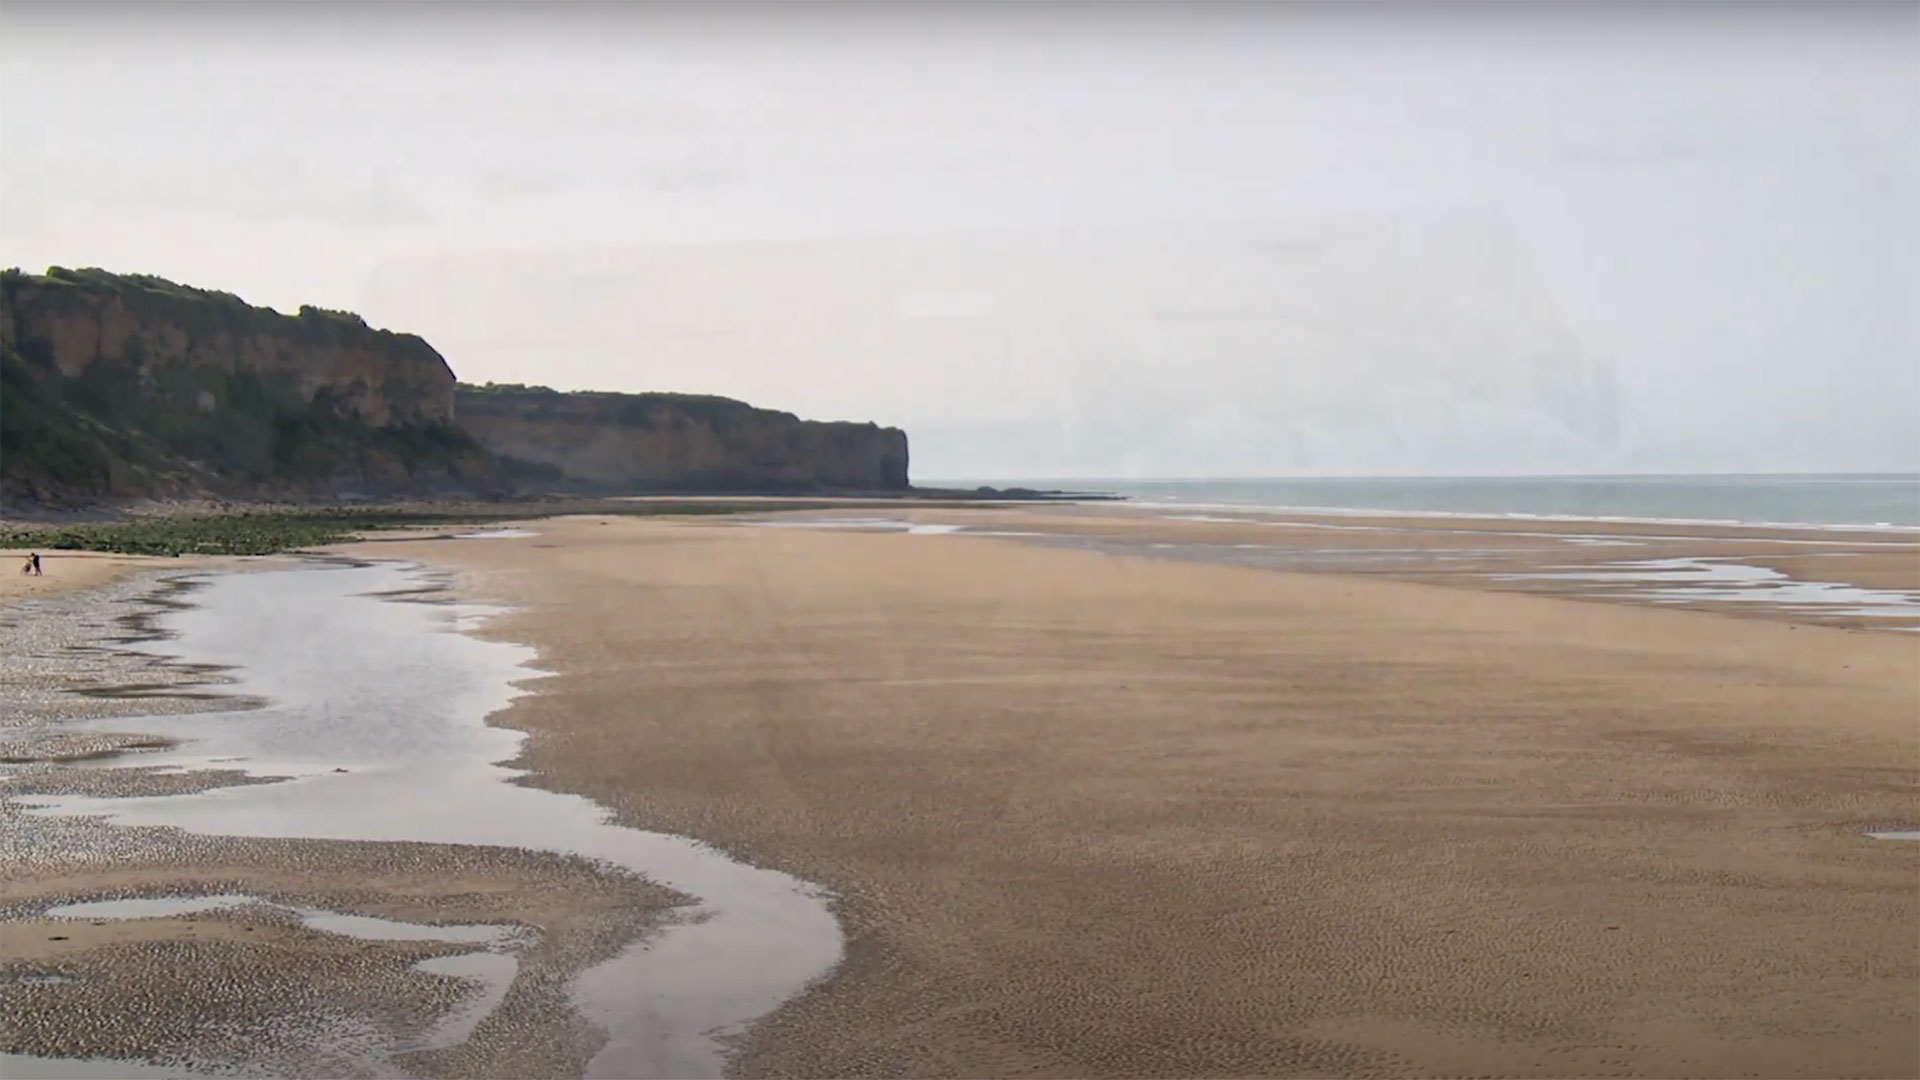 A view of Omaha beach today, showing the outlay of the bluffs and the long stretch of sand that separates them from the shoreline.